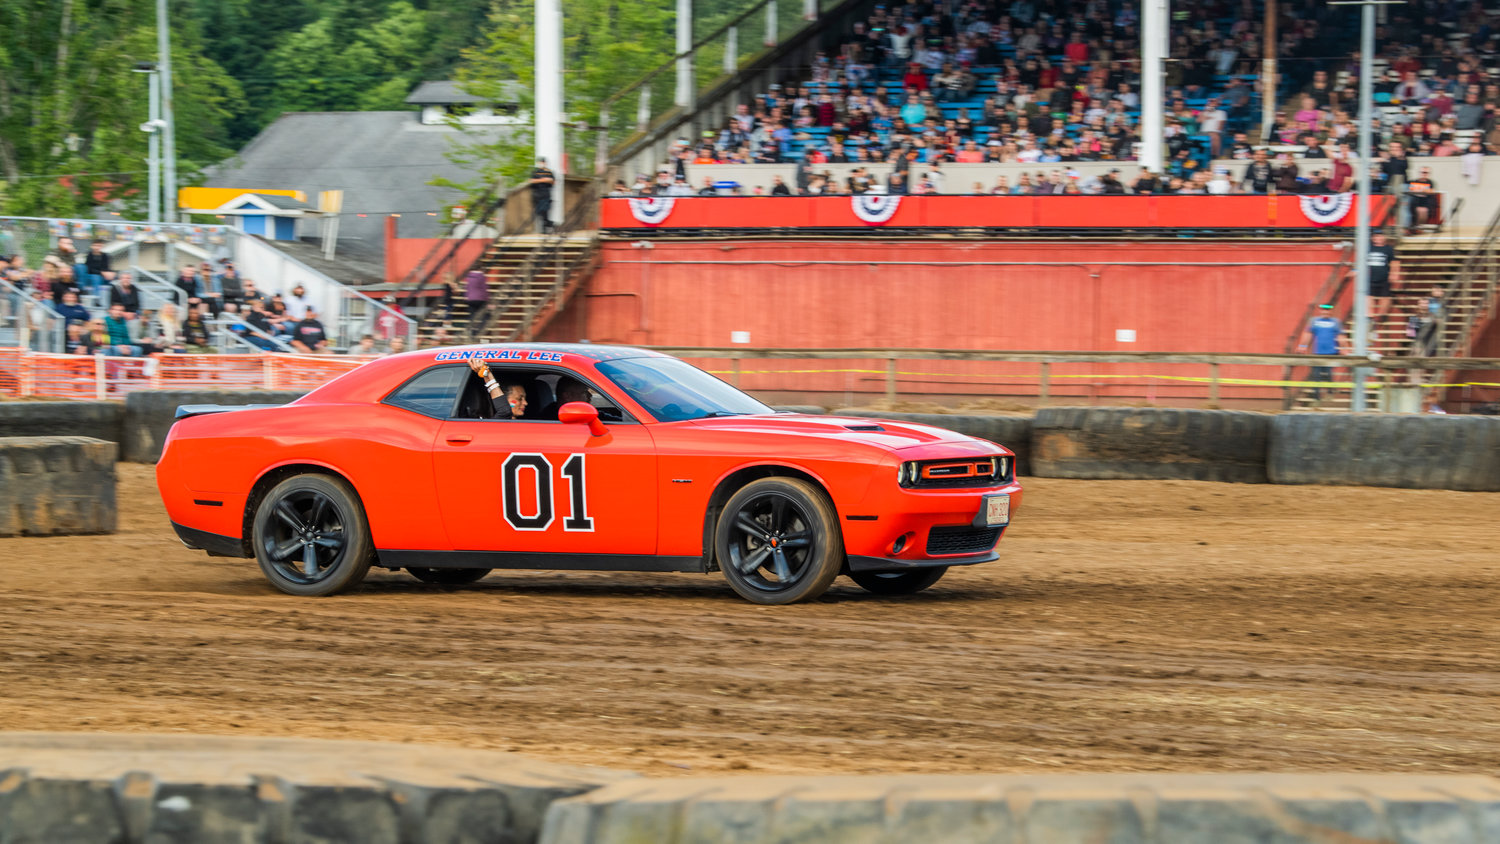 A Dodge Challenger with “General Lee,” decals spins tires in the Southwest Washington Fairgrounds grandstand arena Sunday night during Summerfest celebrations.